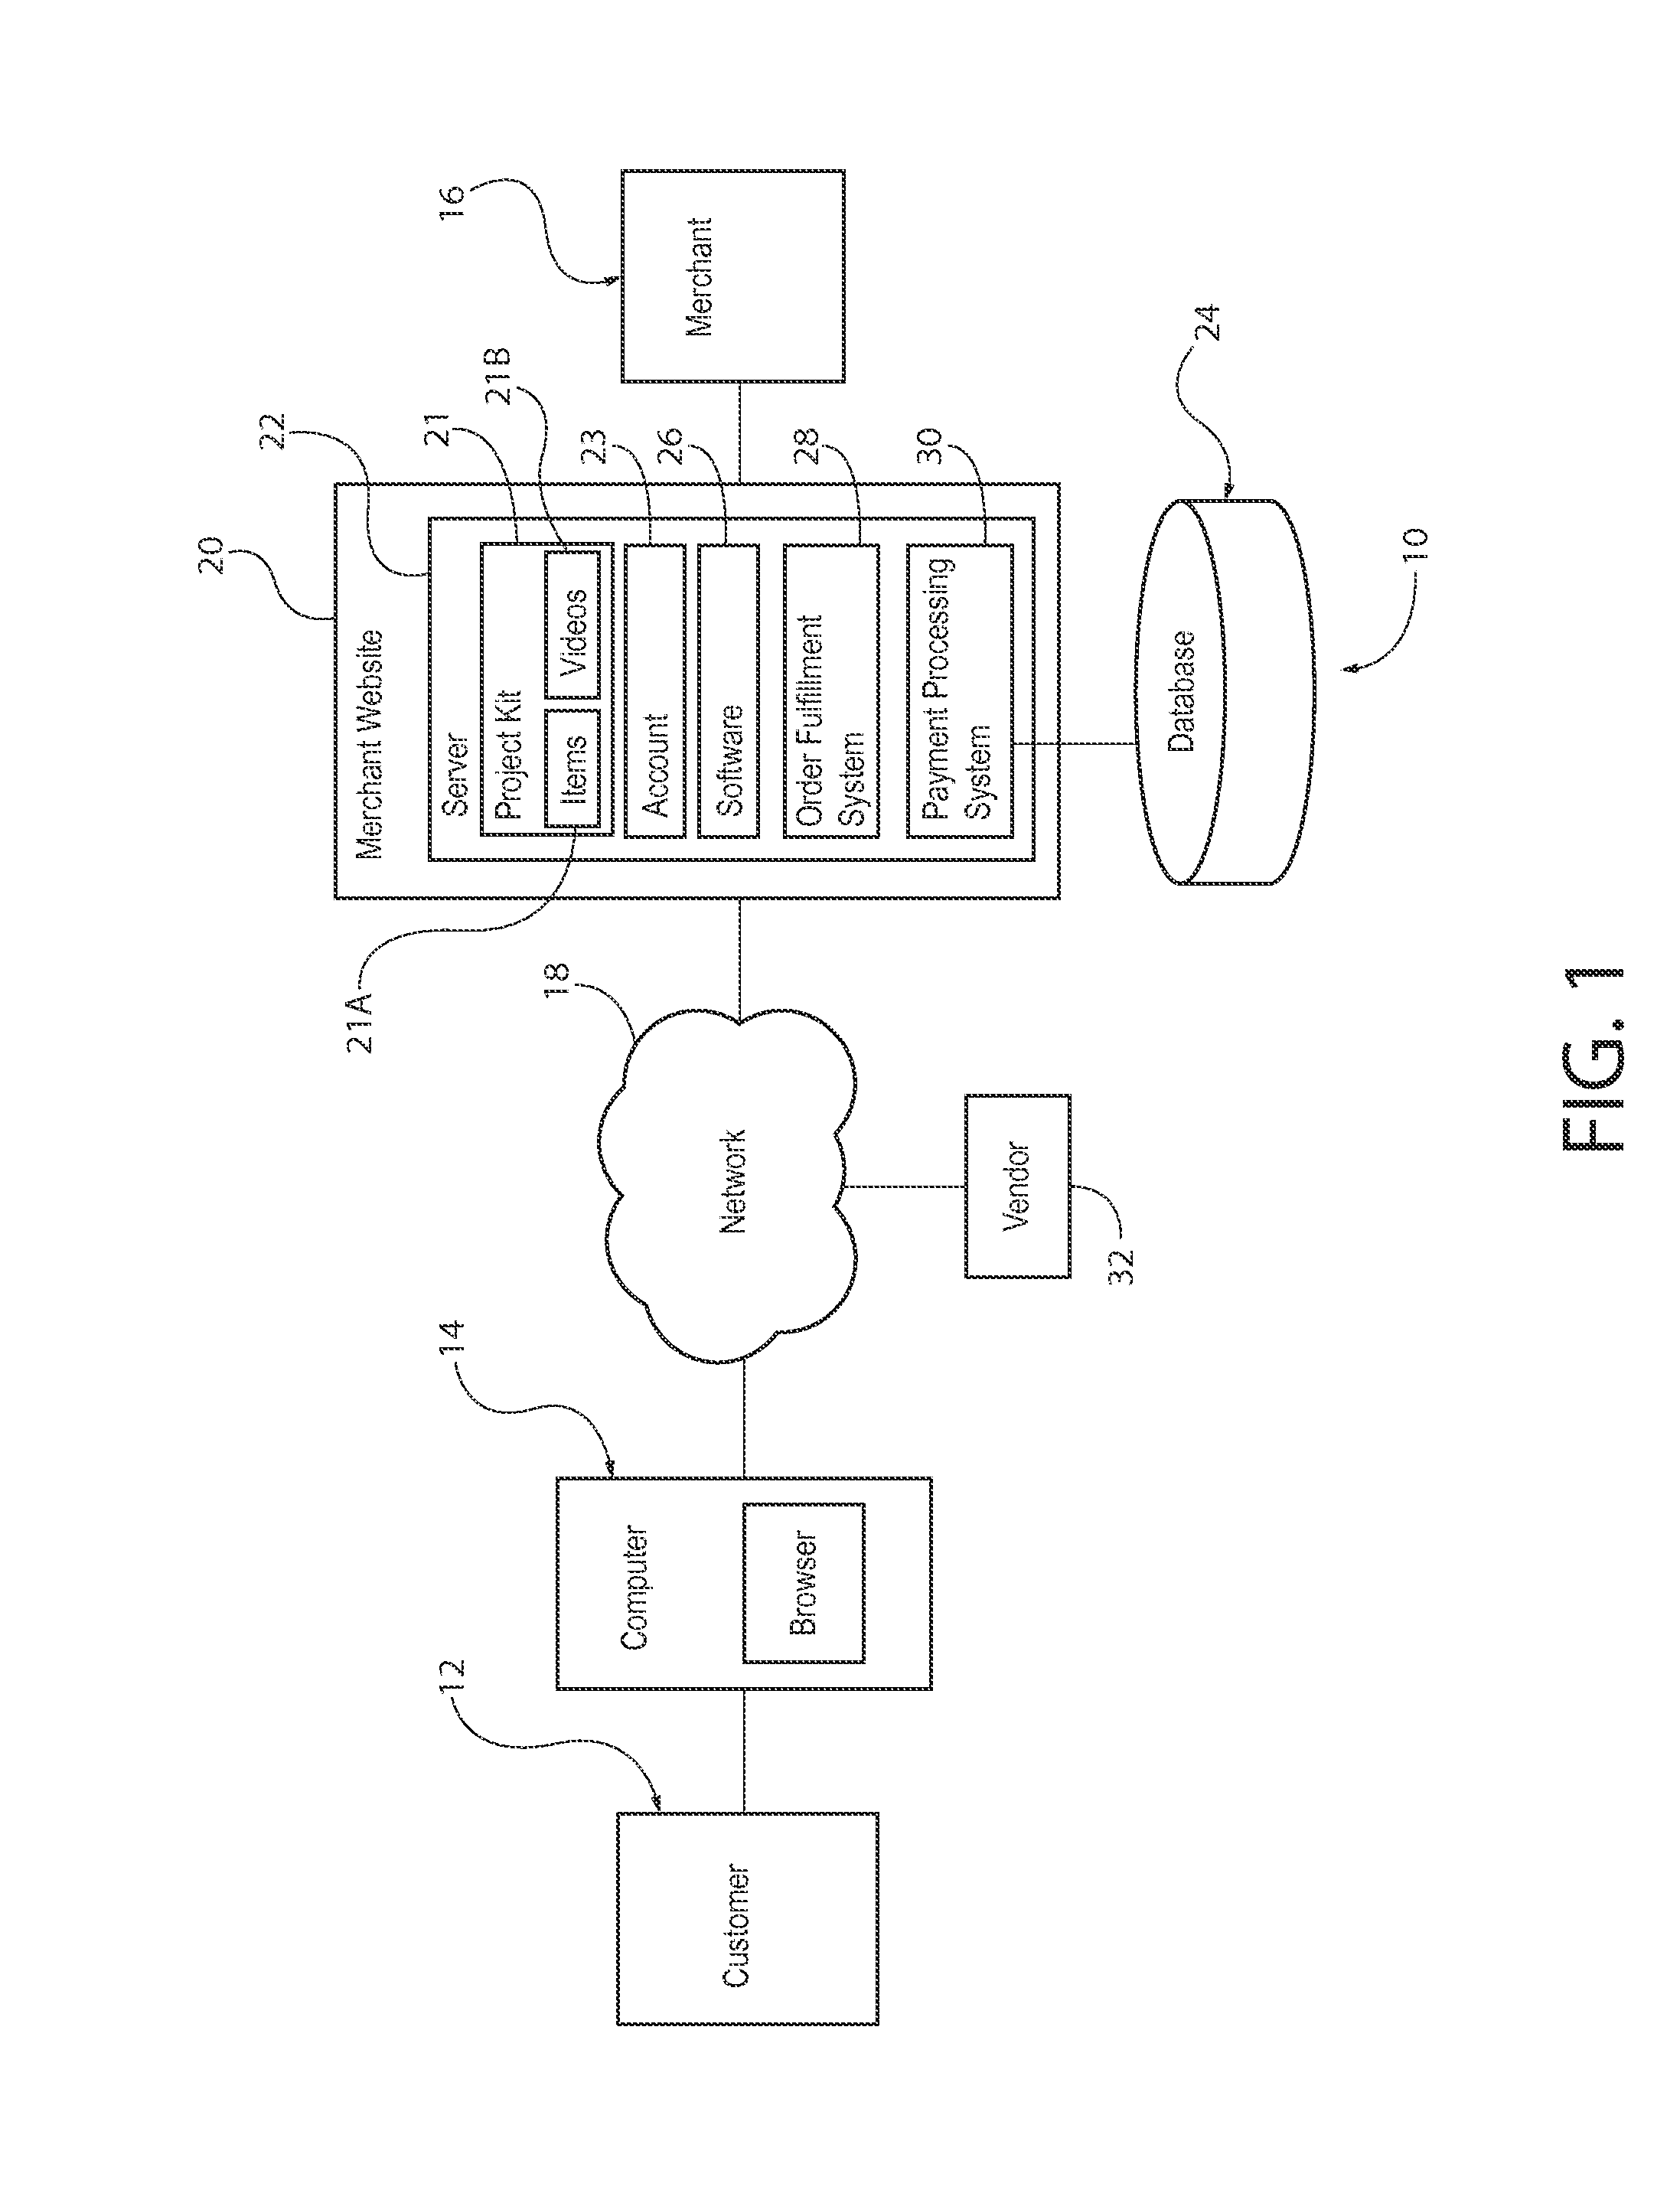 System and method for bundling, selling, and delivering tangible items and associated videos in an event driven e-commerce system